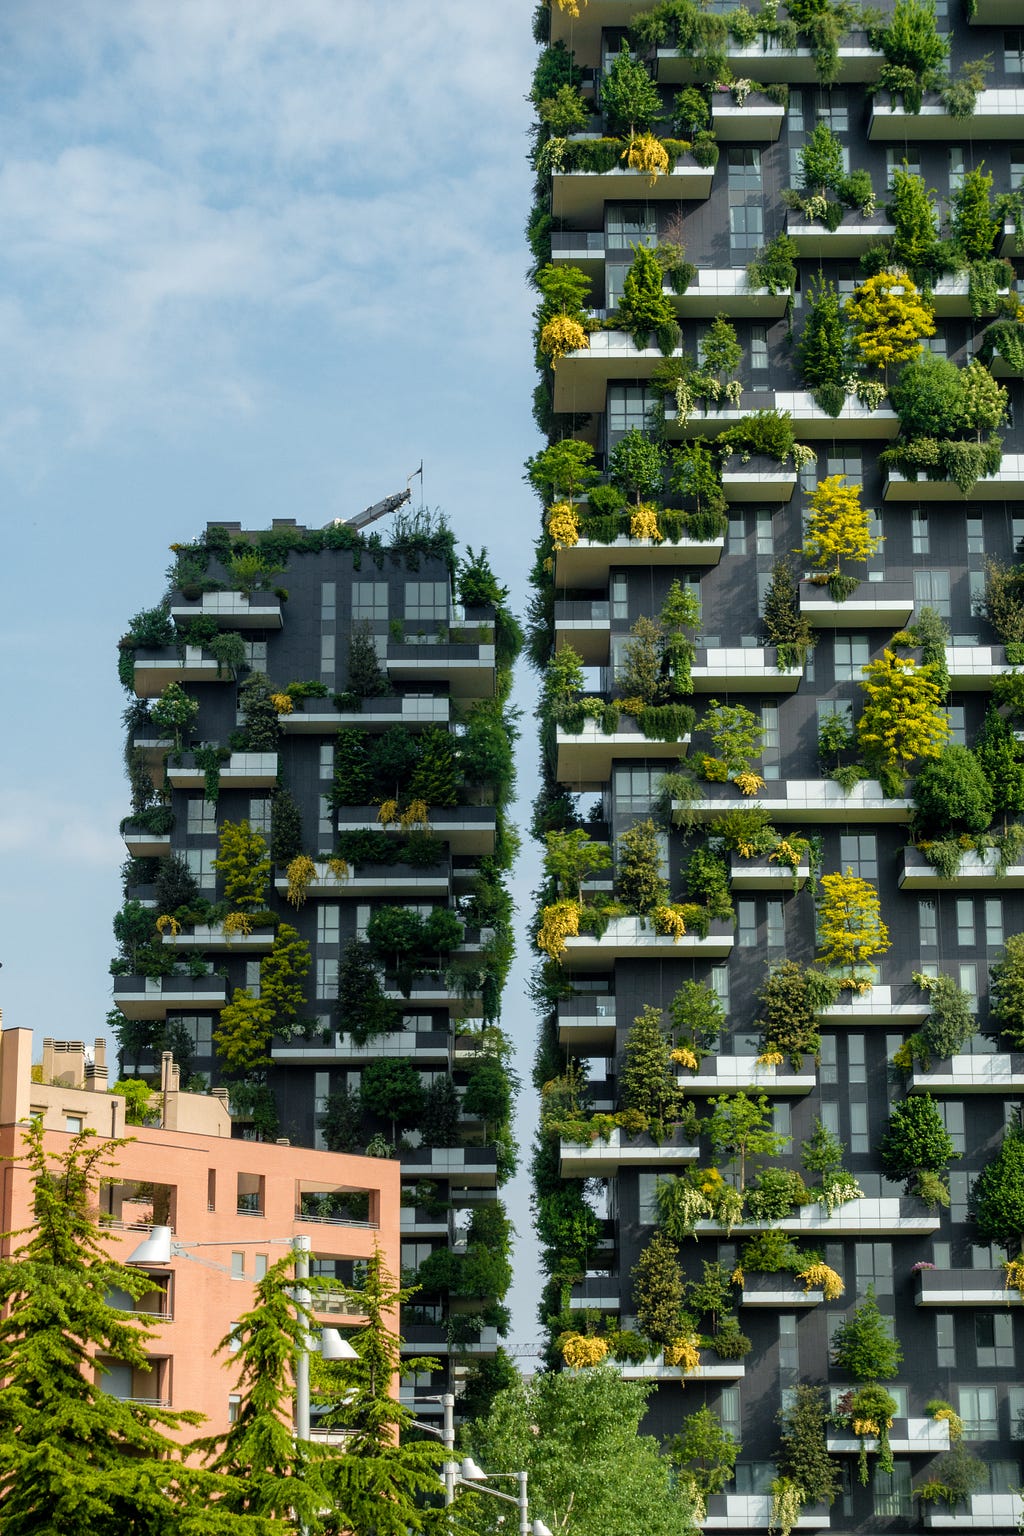 Bosco Verticale, two apartment blocks covered in plants